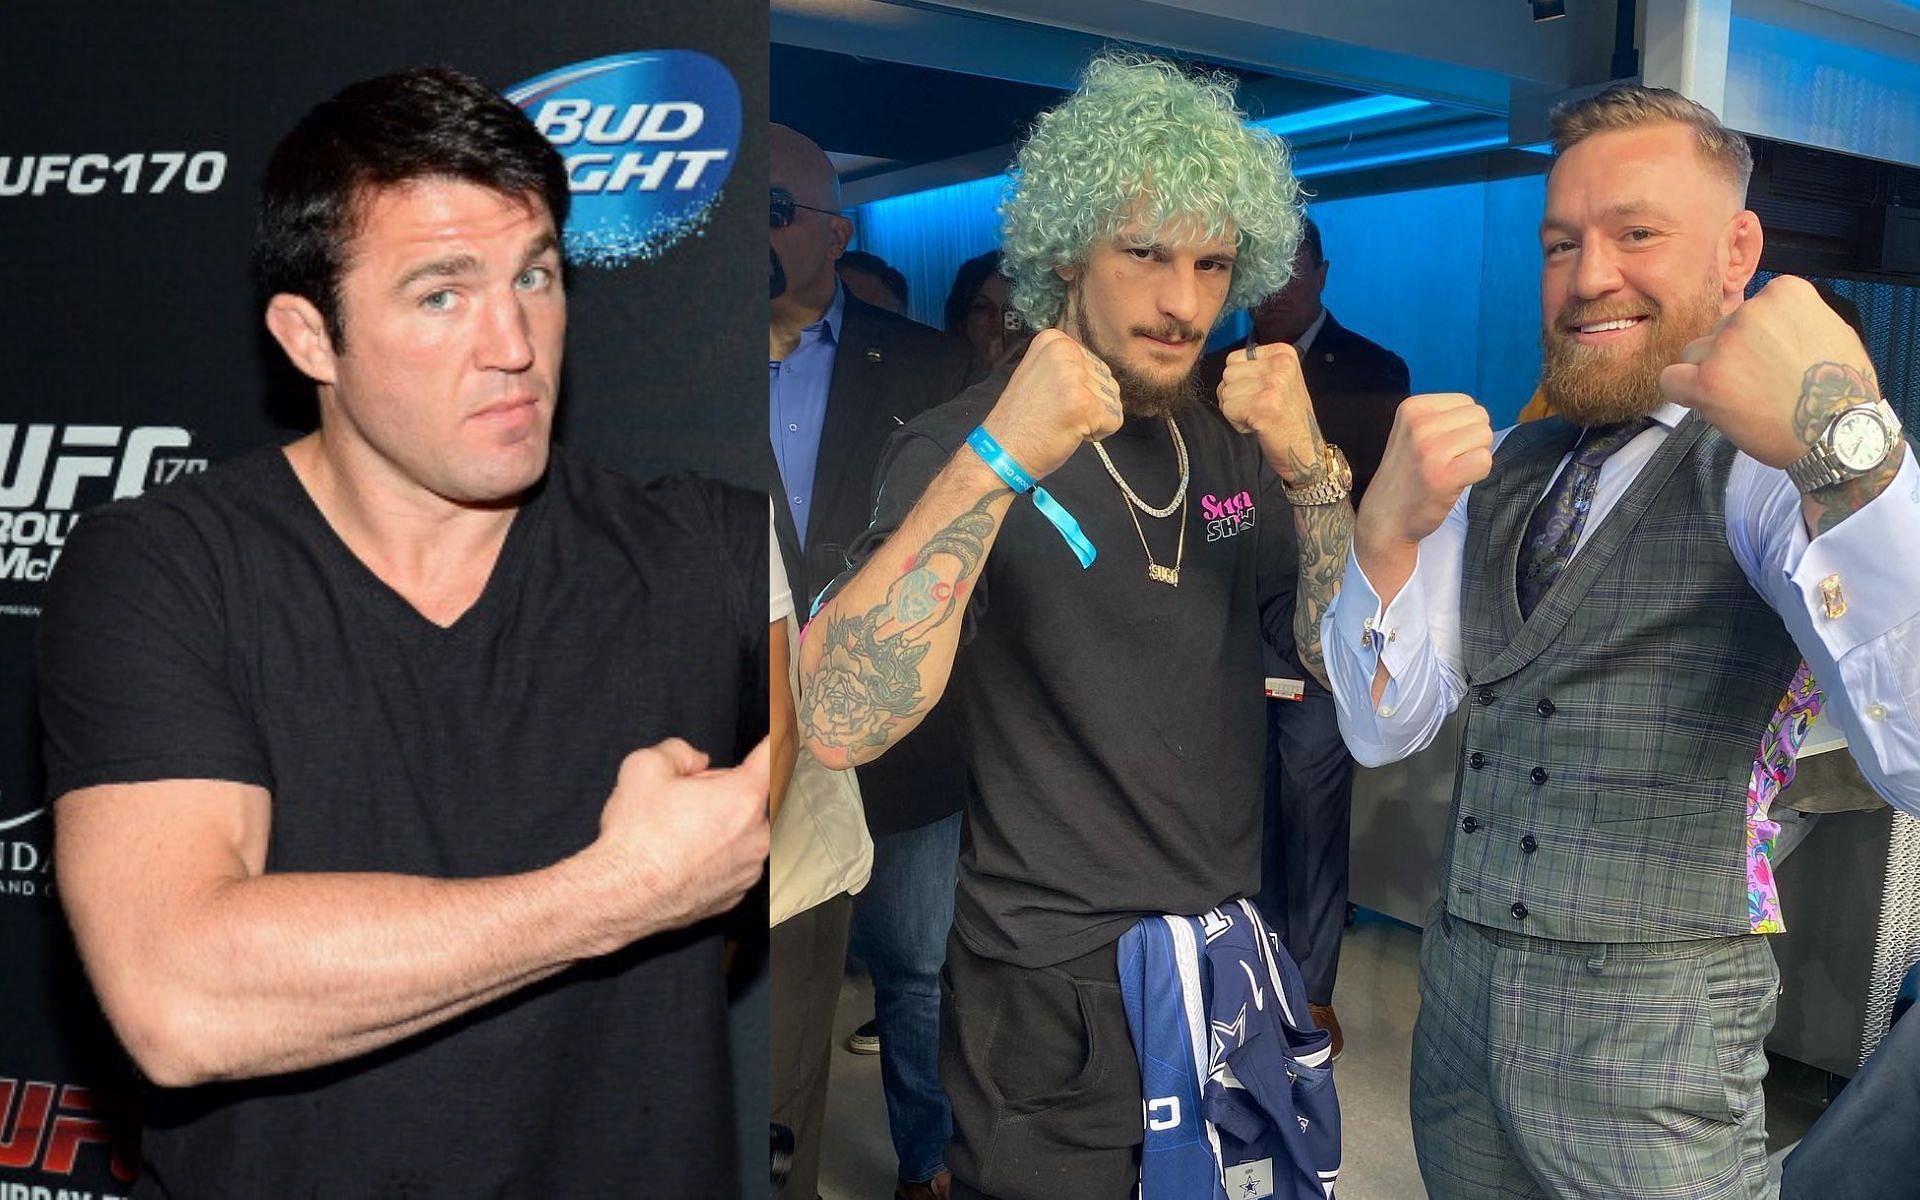 From left to right: Chael Sonnen, Sean O&#039;Malley and Conor McGregor [Image Courtesy: @sugaseanmma on Instagram]